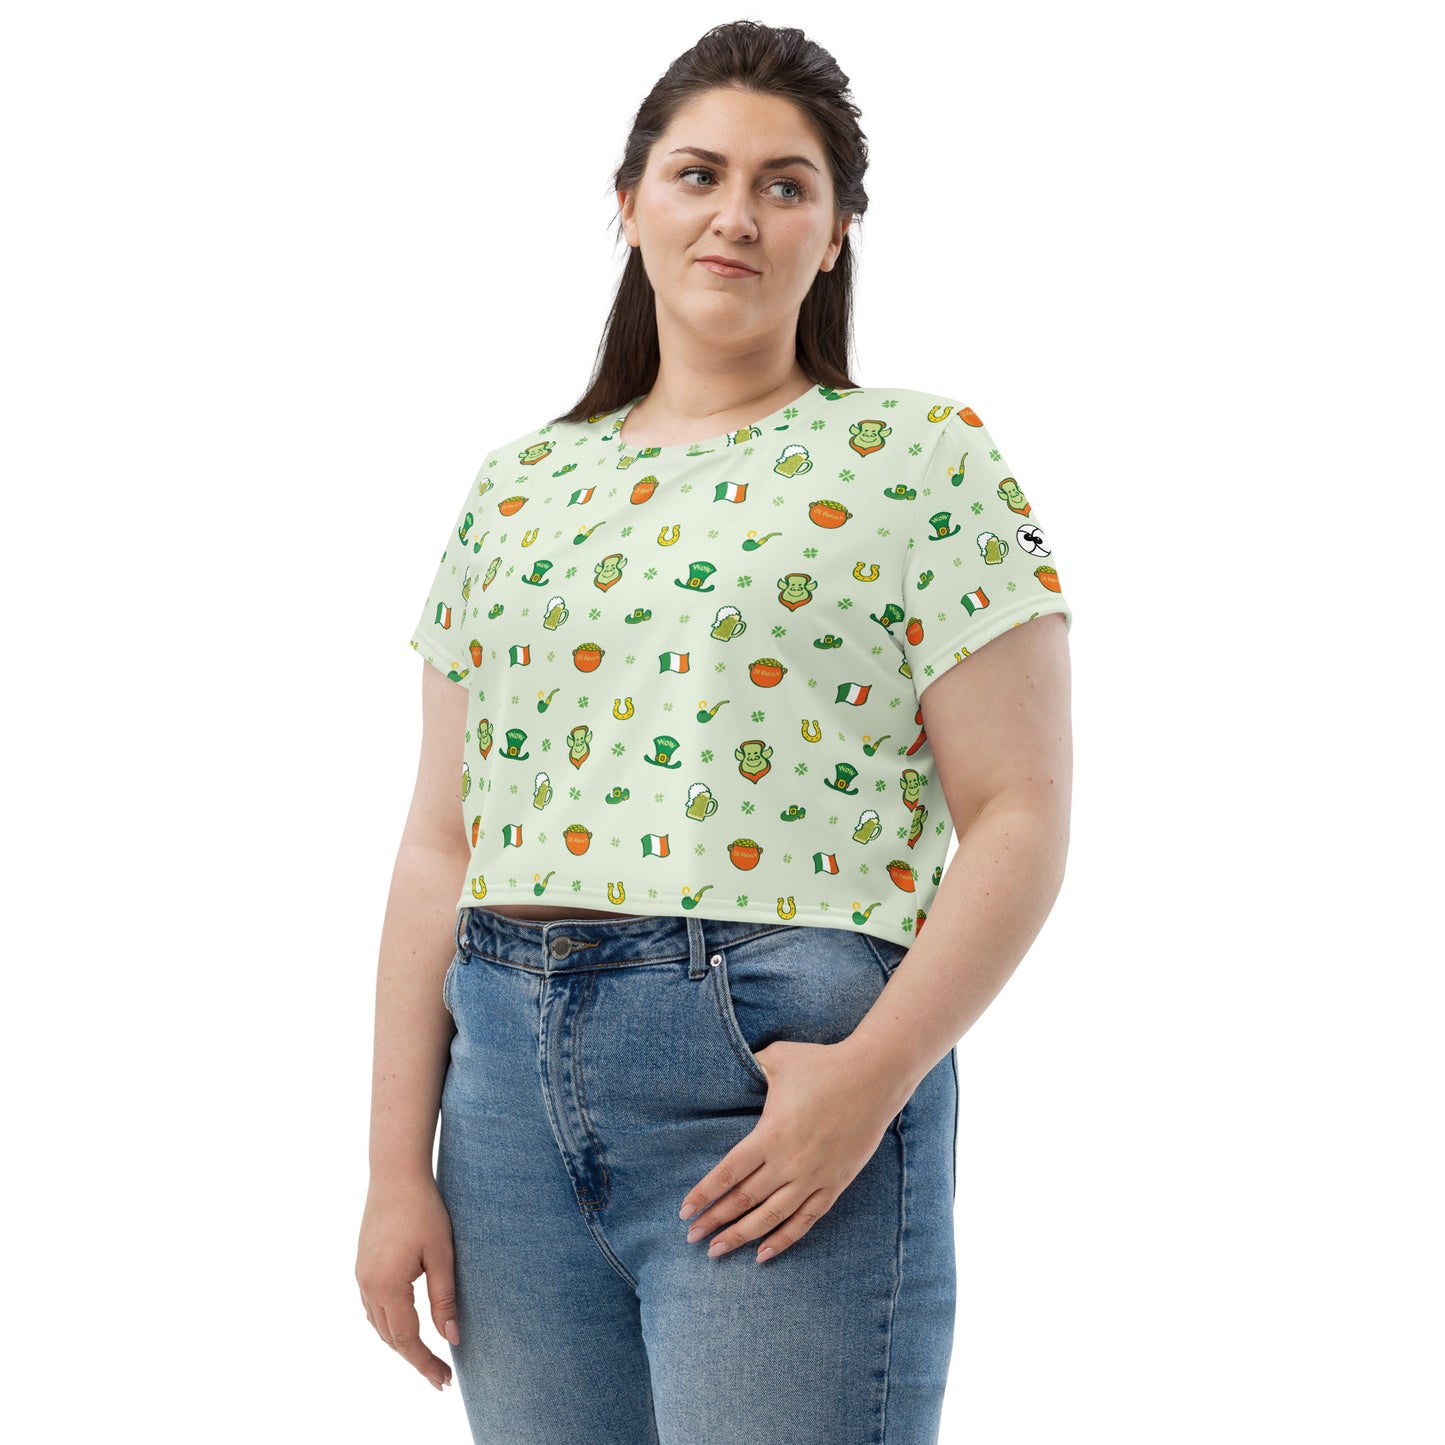 Celebrate Saint Patrick's Day in style All-Over Print Crop Tee. Left front view